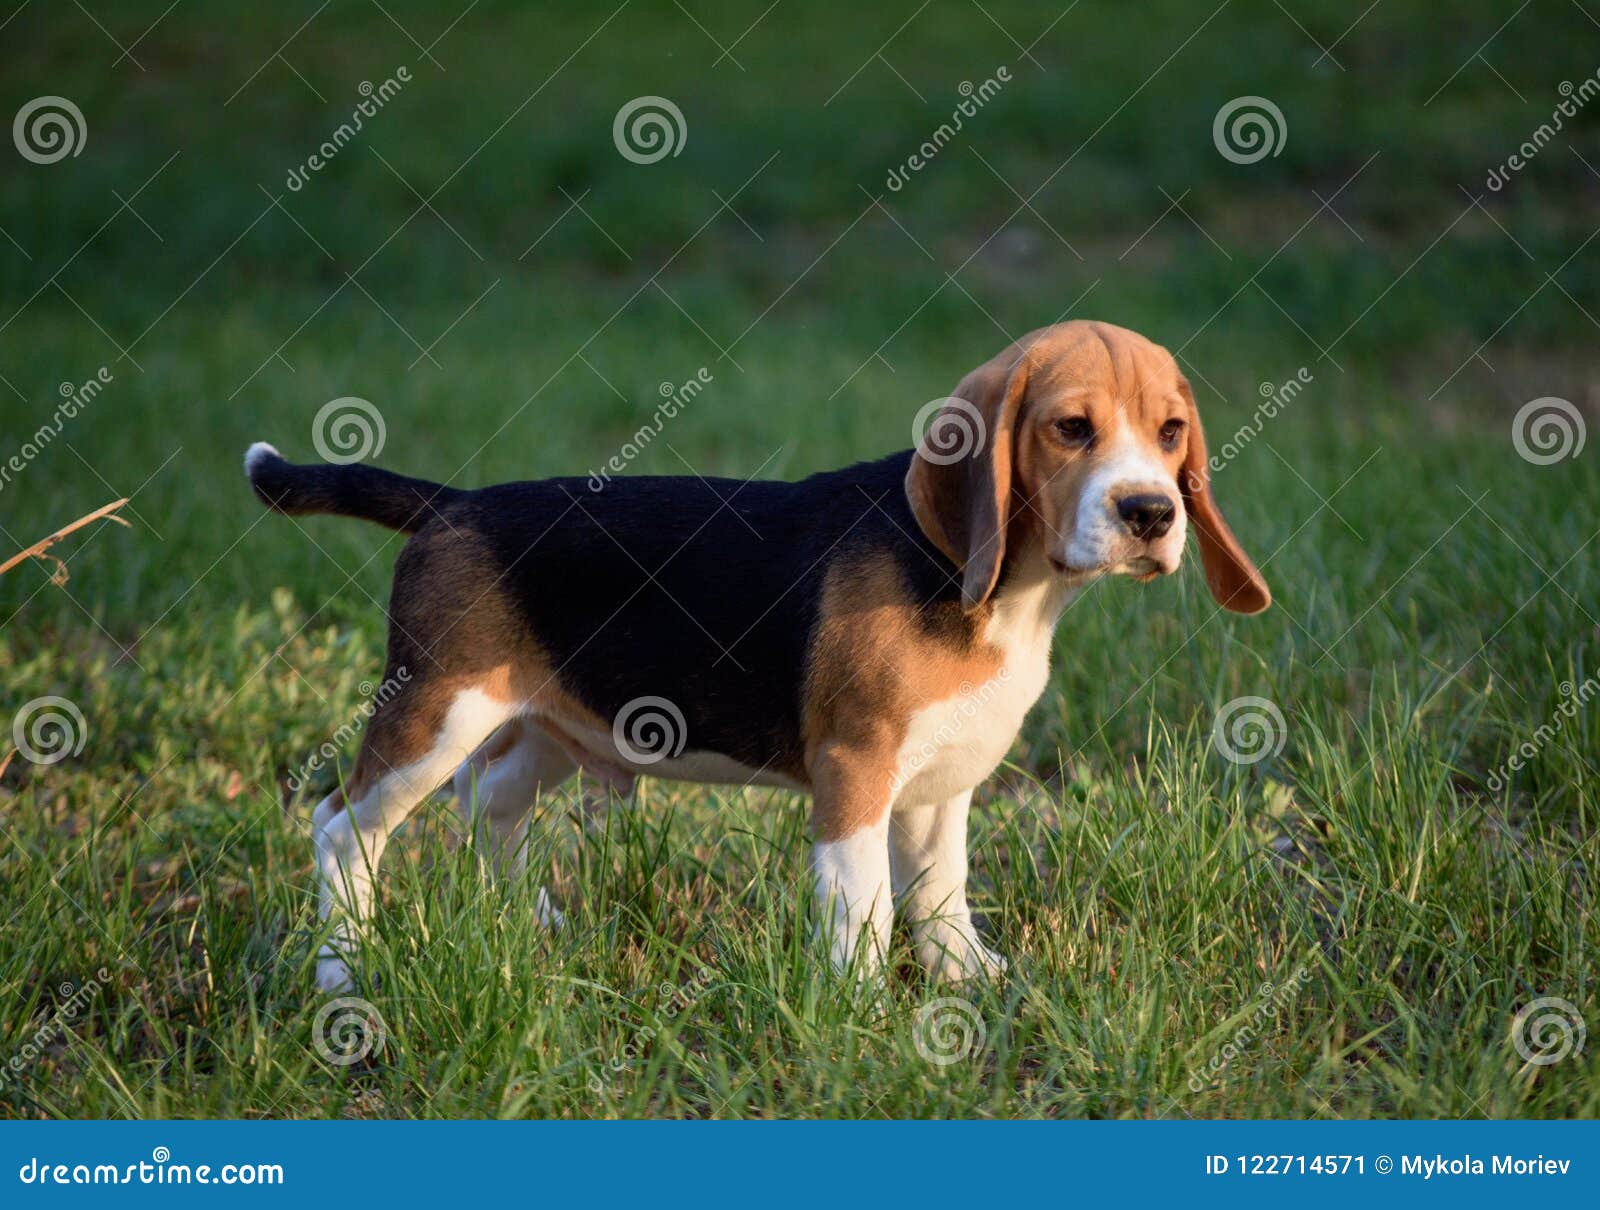 Beautiful Tricolor Puppy Of English Beagle Stay On Green Grass Beagle Is A Breed Of Small Hound Similar In Appearance To The Muc Stock Image Image Of Lovely Background 122714571